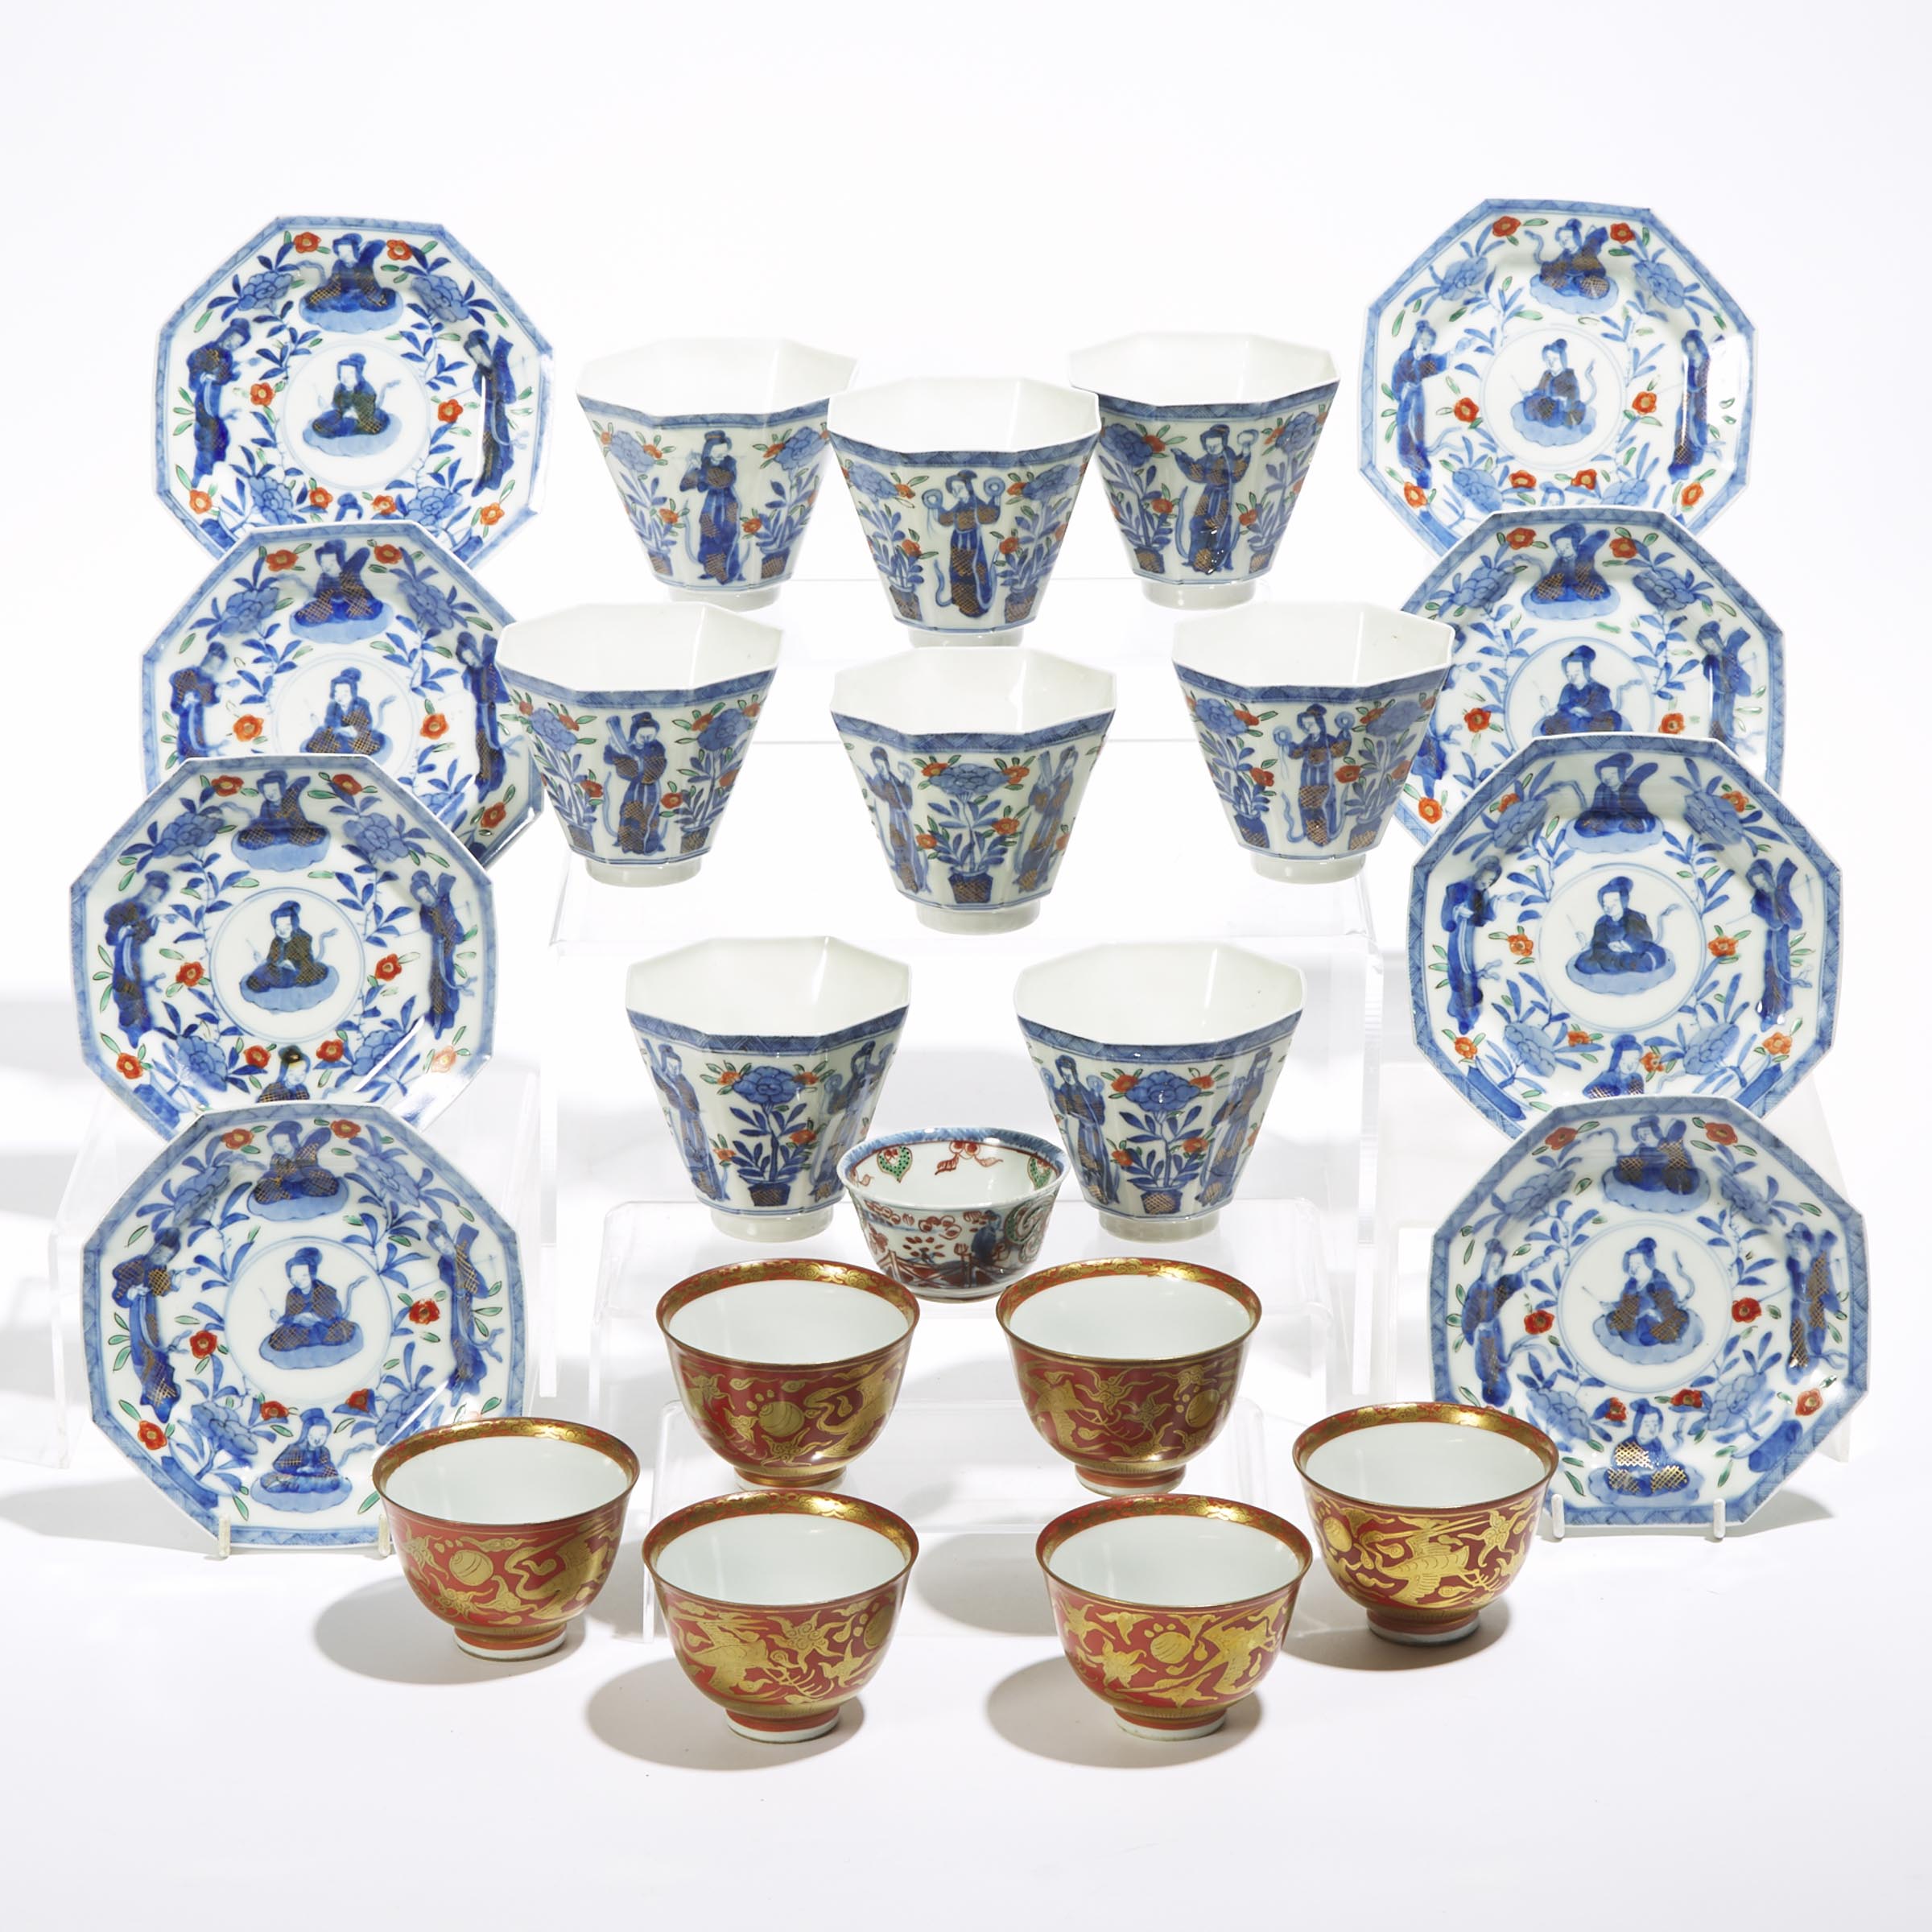 A Group of Twenty-Three Japanese Export Cups and Saucers, 18th/19th Century